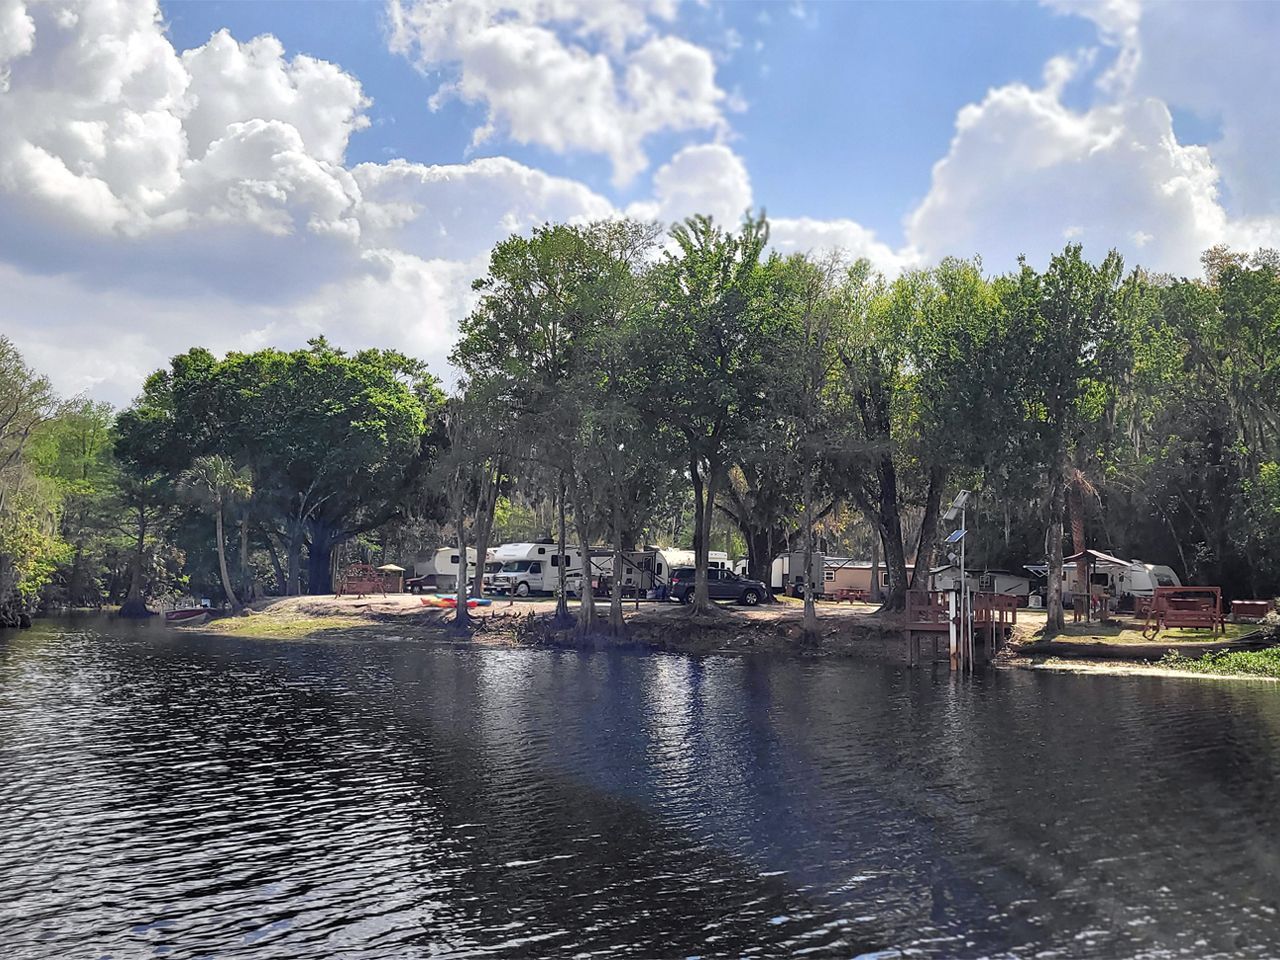 a large body of water surrounded by trees and a campground .